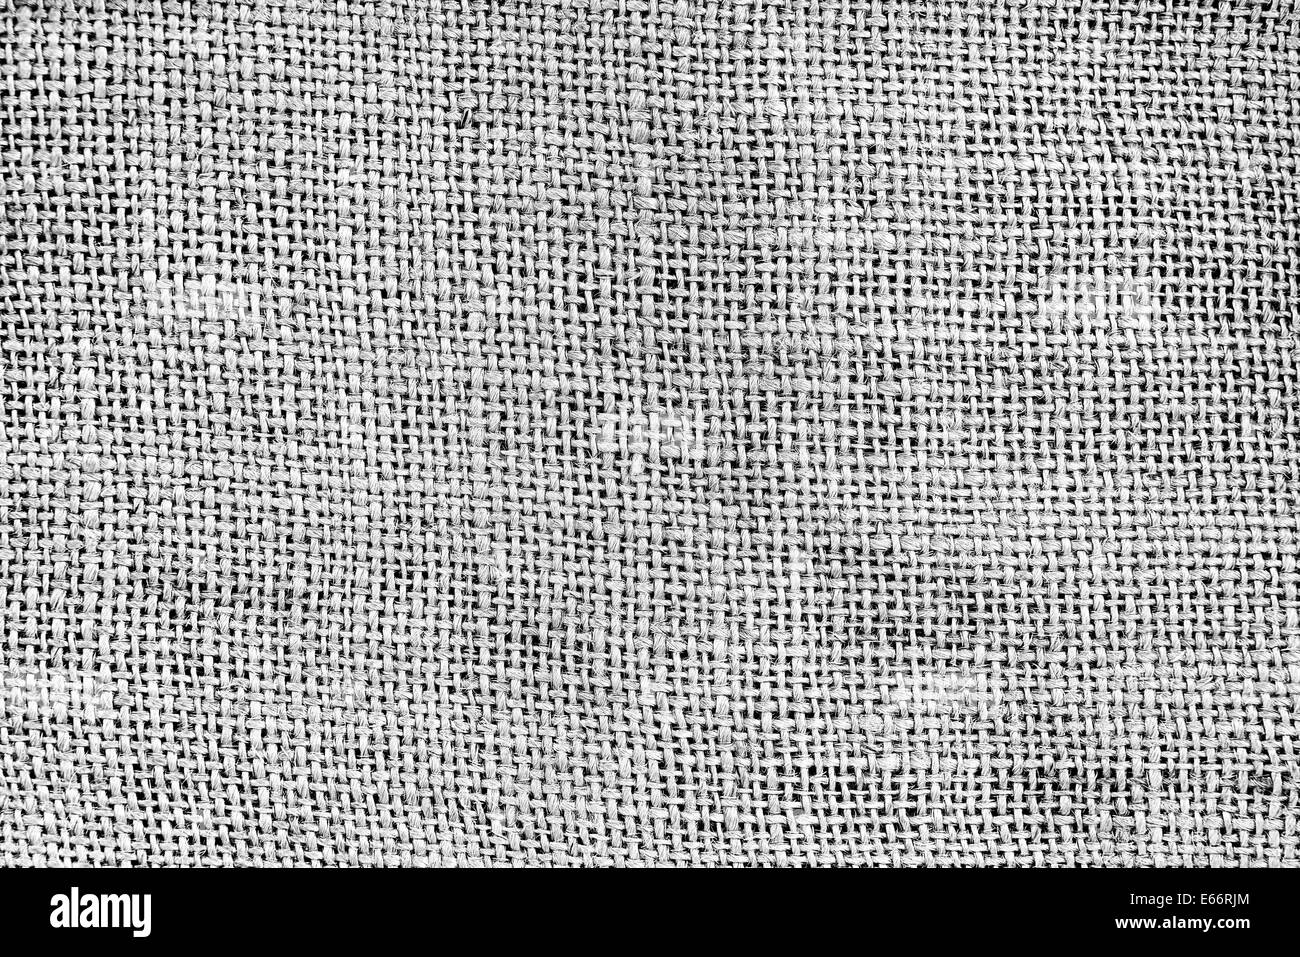 Fabric texture Black and White Stock Photos & Images - Alamy